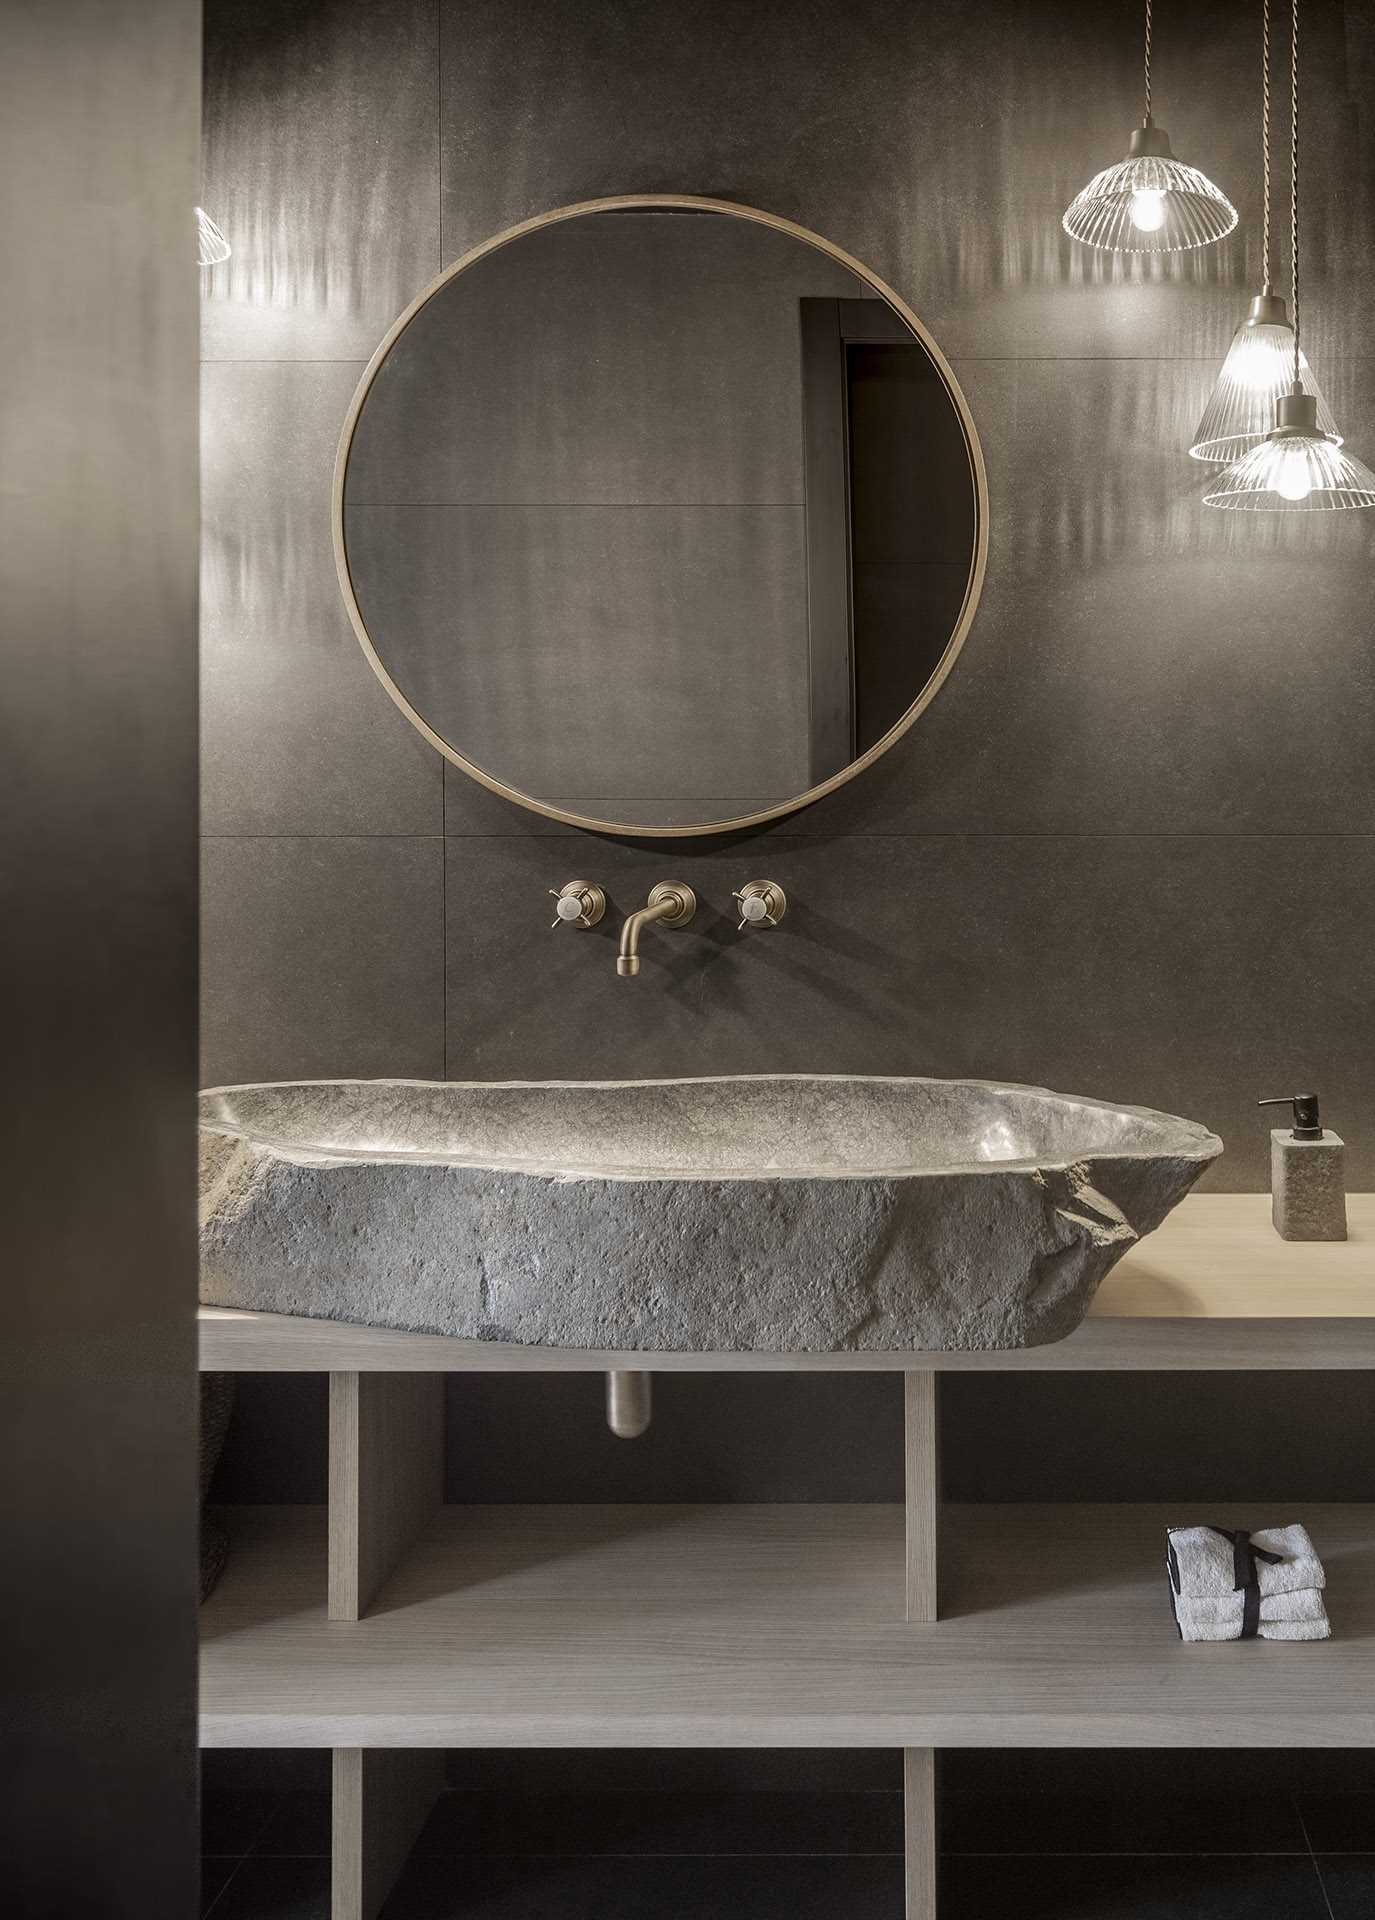 This modern powder room, with its dark walls and floors, is a strong contrast to the rest of the light interior.